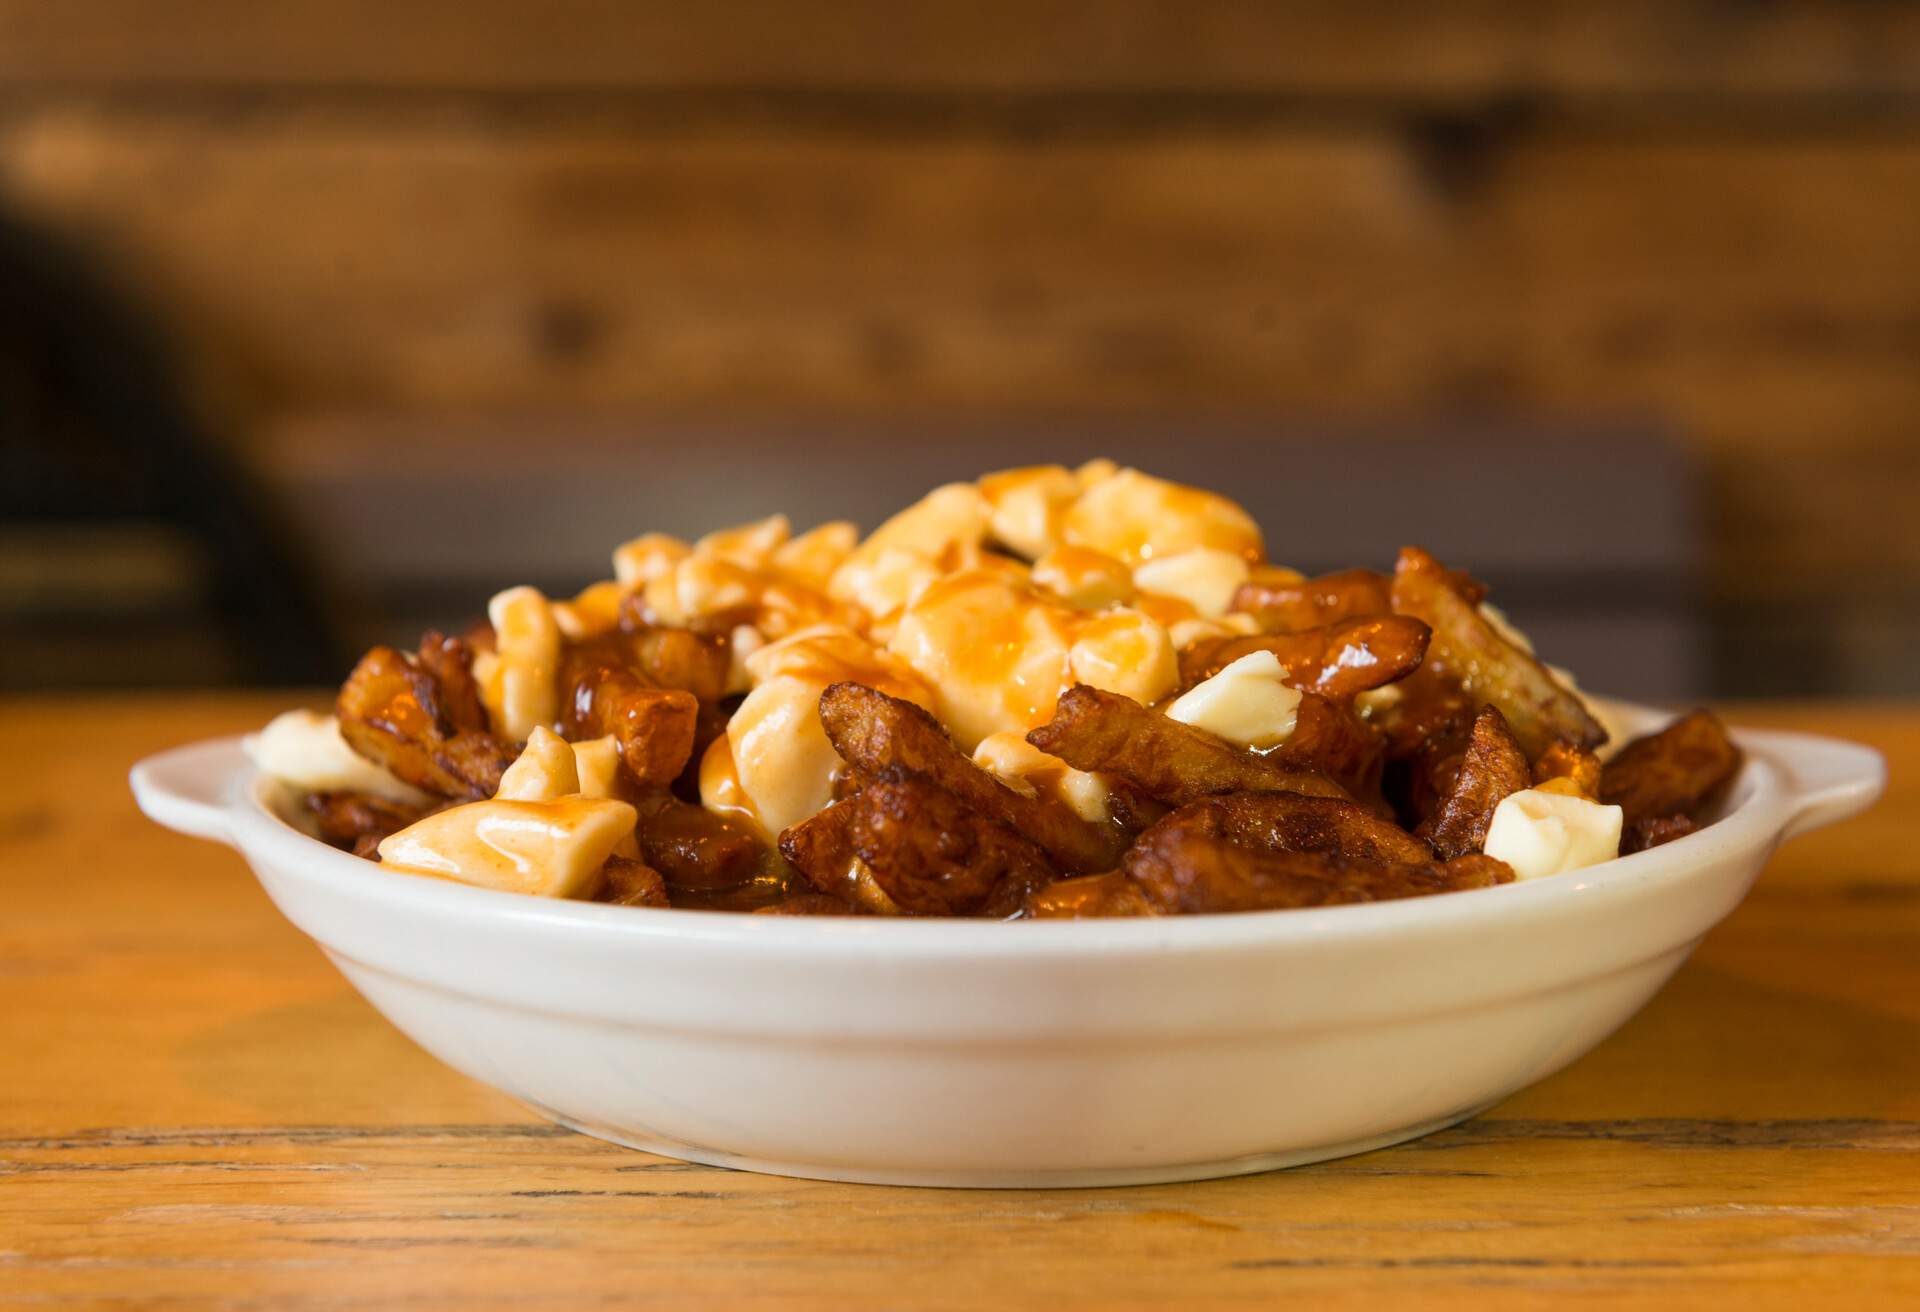 This is a horizontal, color, royalty free stock photograph of a hot full plate of French Canadian cuisine, poutine, which consists of fries, curd cheese, and gravy. Photographed with a Nikon D800.